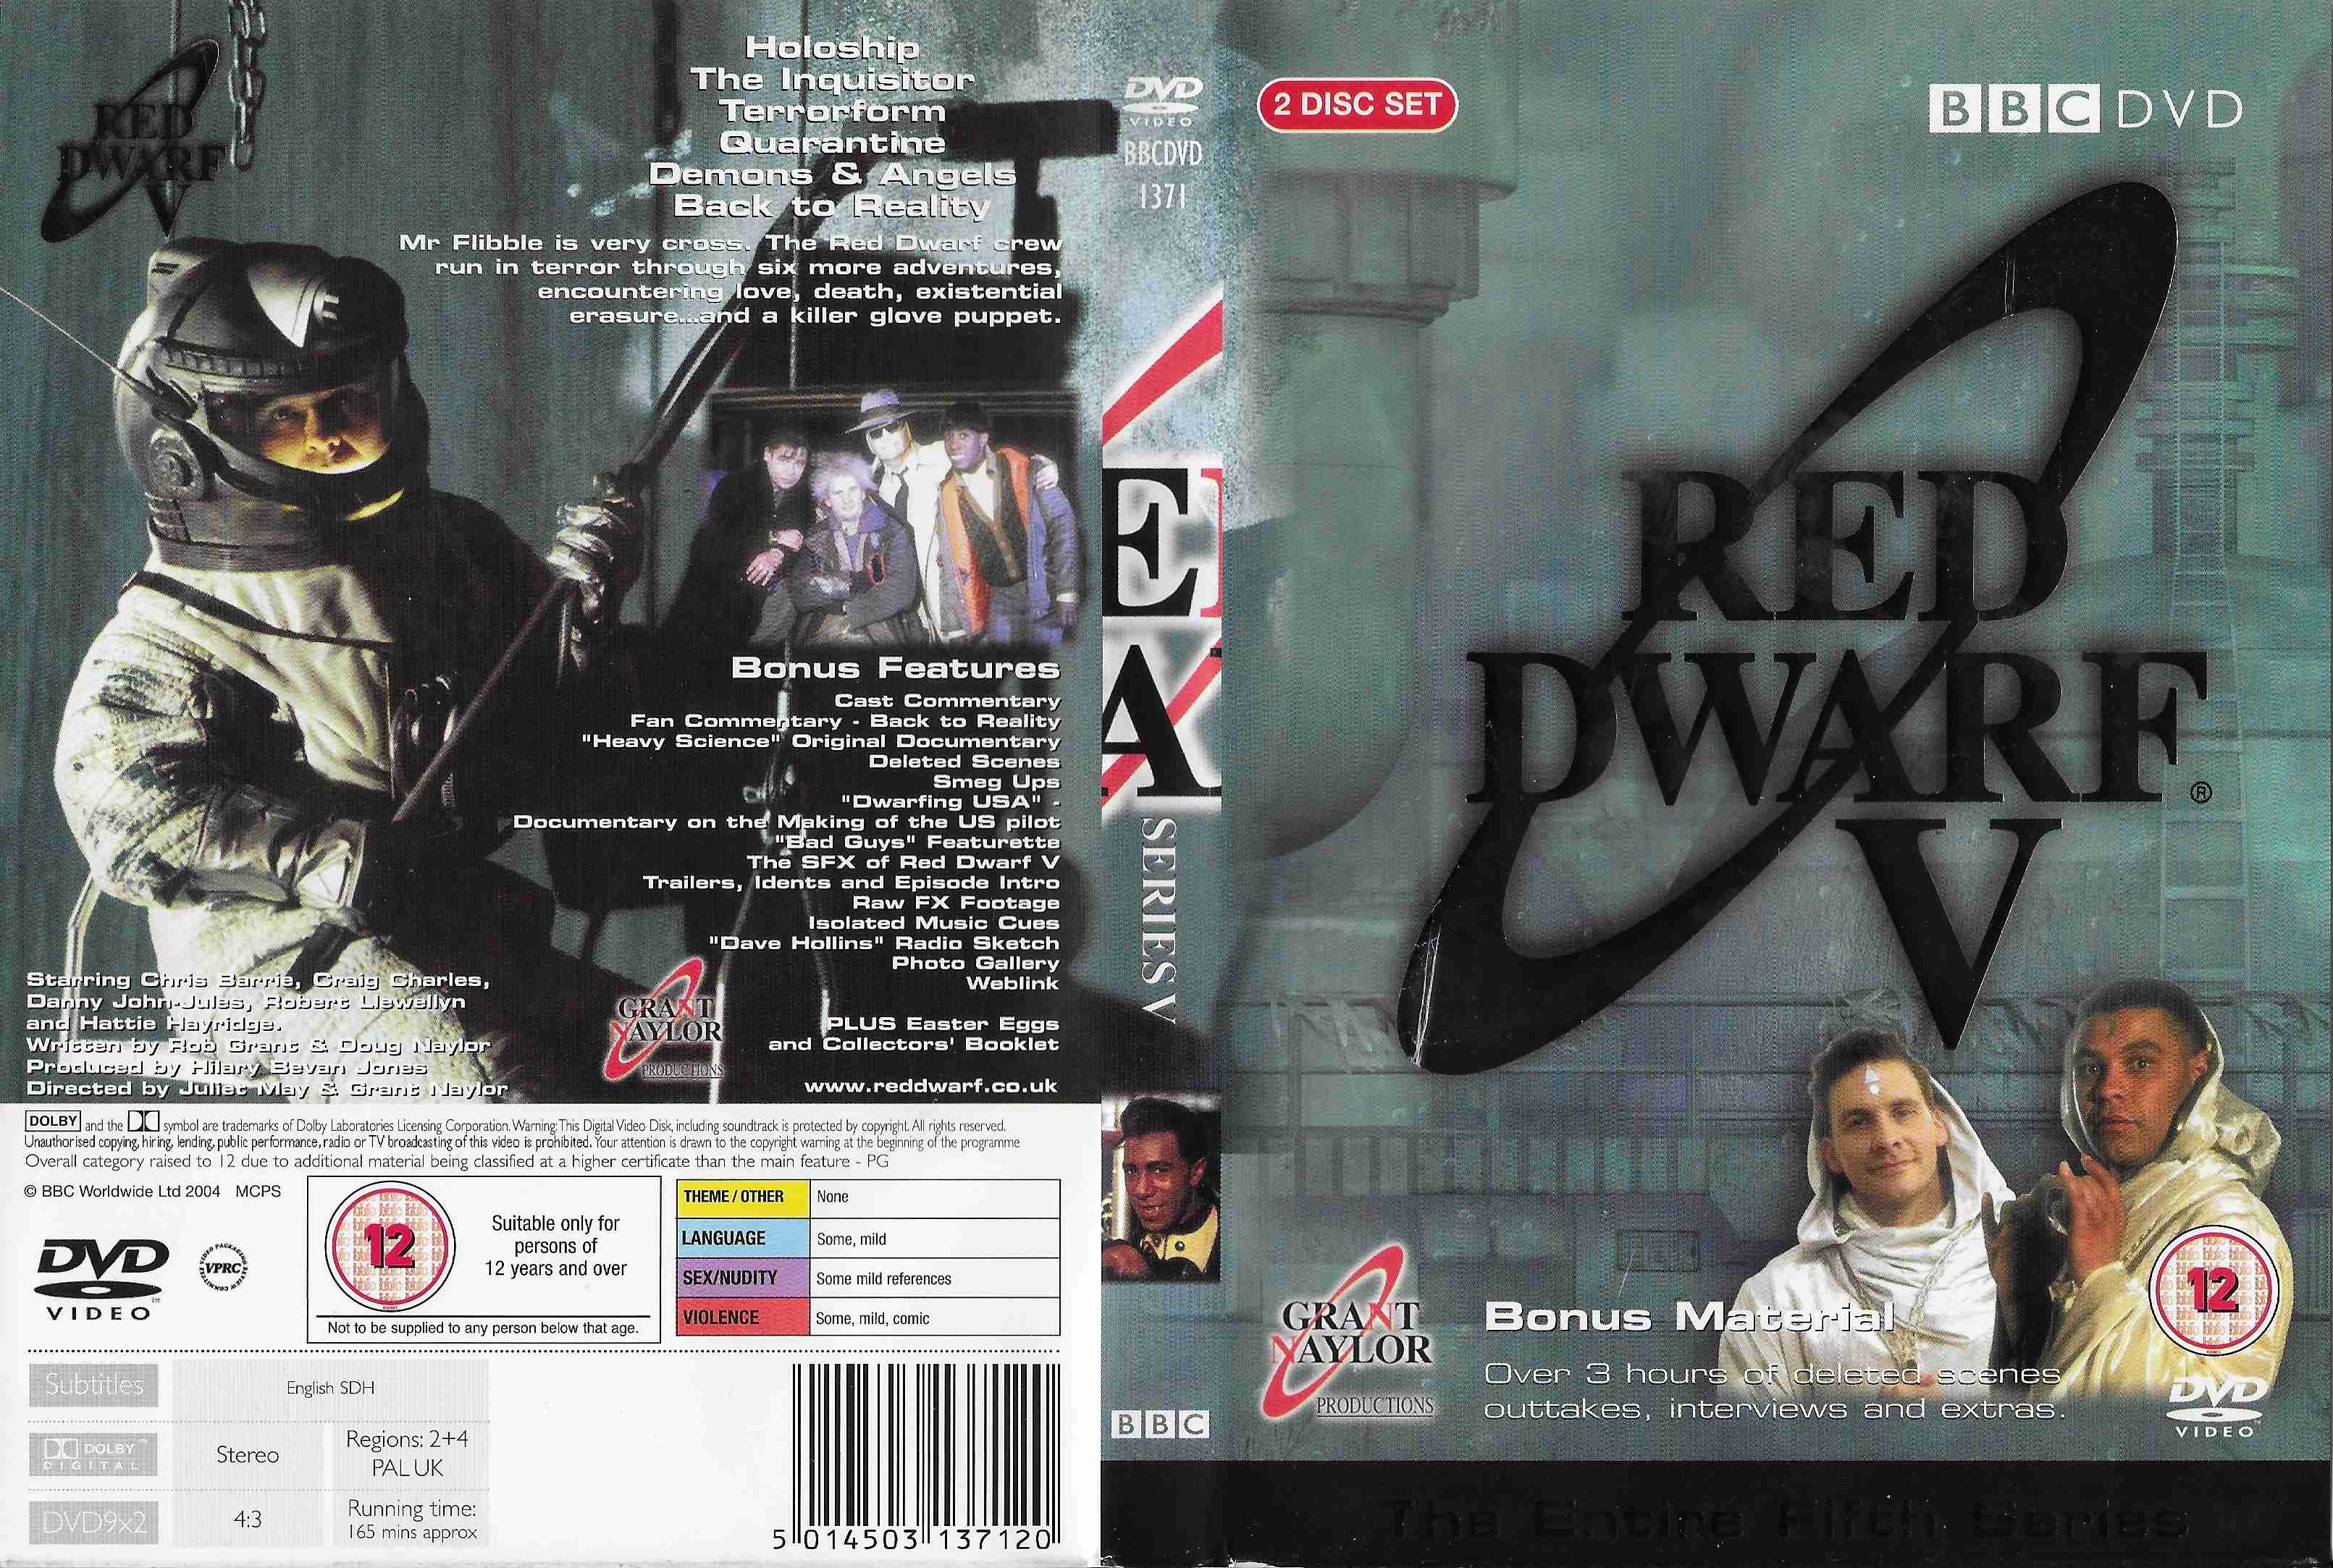 Picture of BBCDVD 1371 Red dwarf - Series V by artist Rob Grant / Doug Naylor from the BBC records and Tapes library